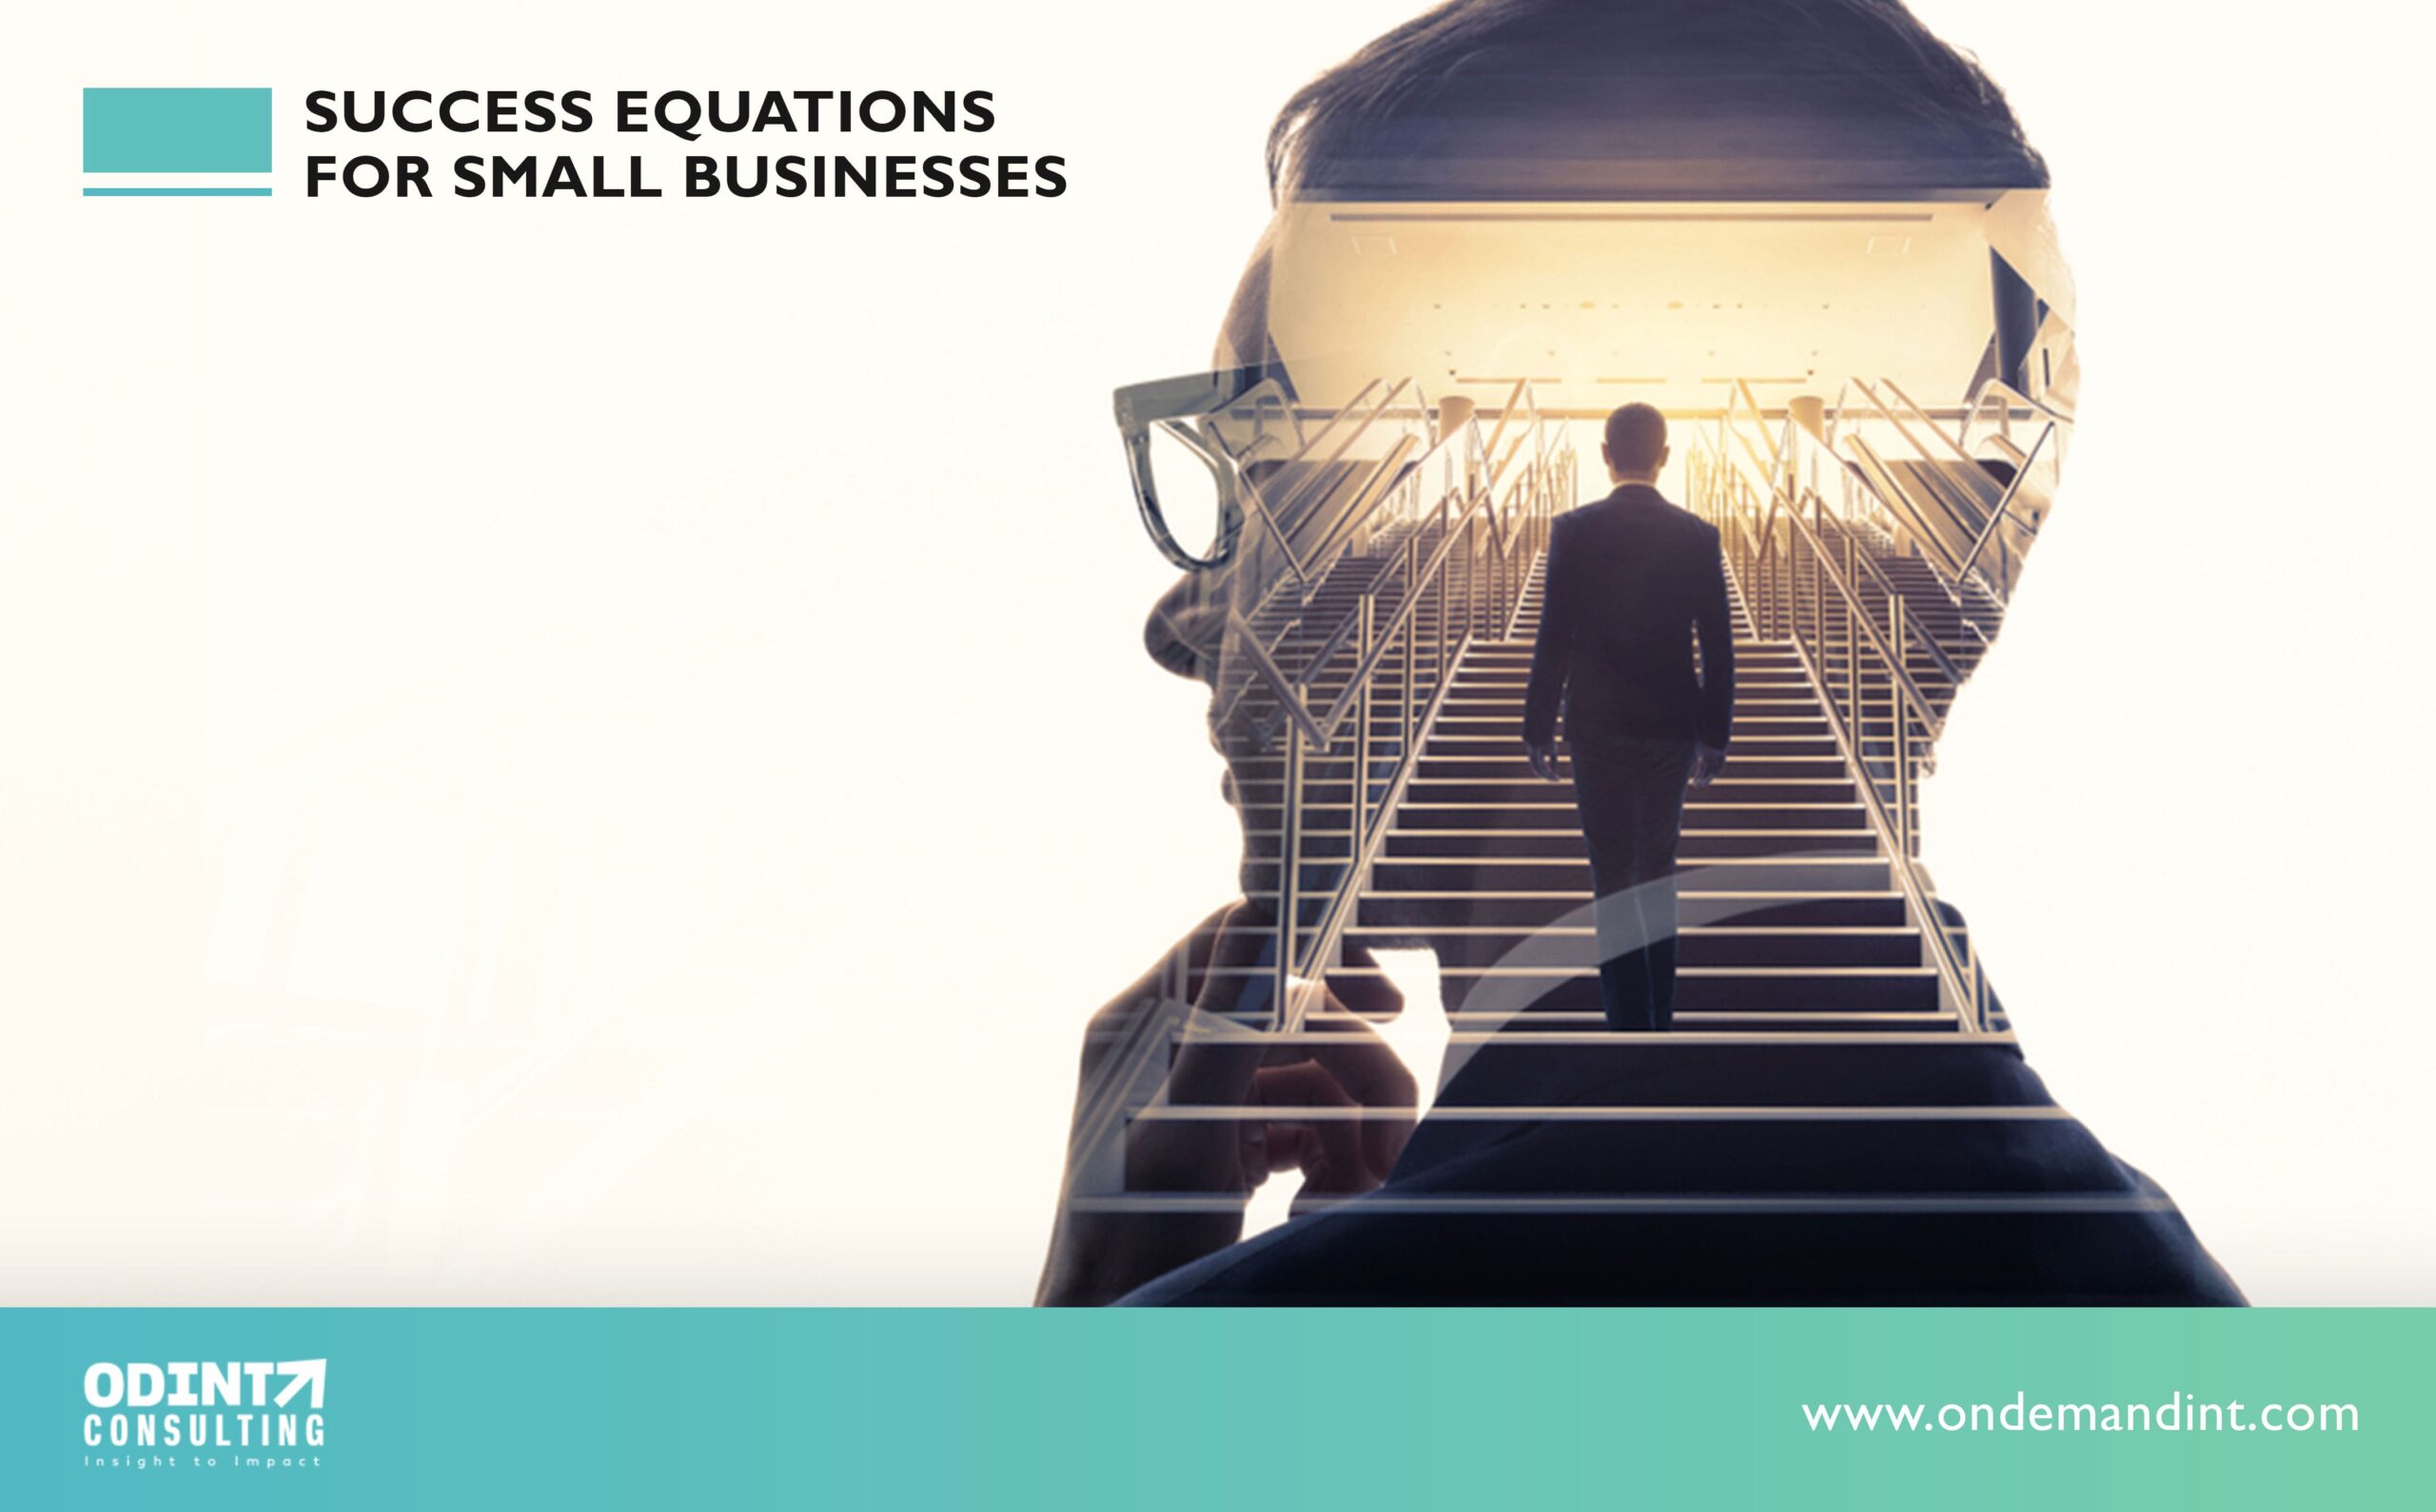 10 Success Equations for Small Businesses